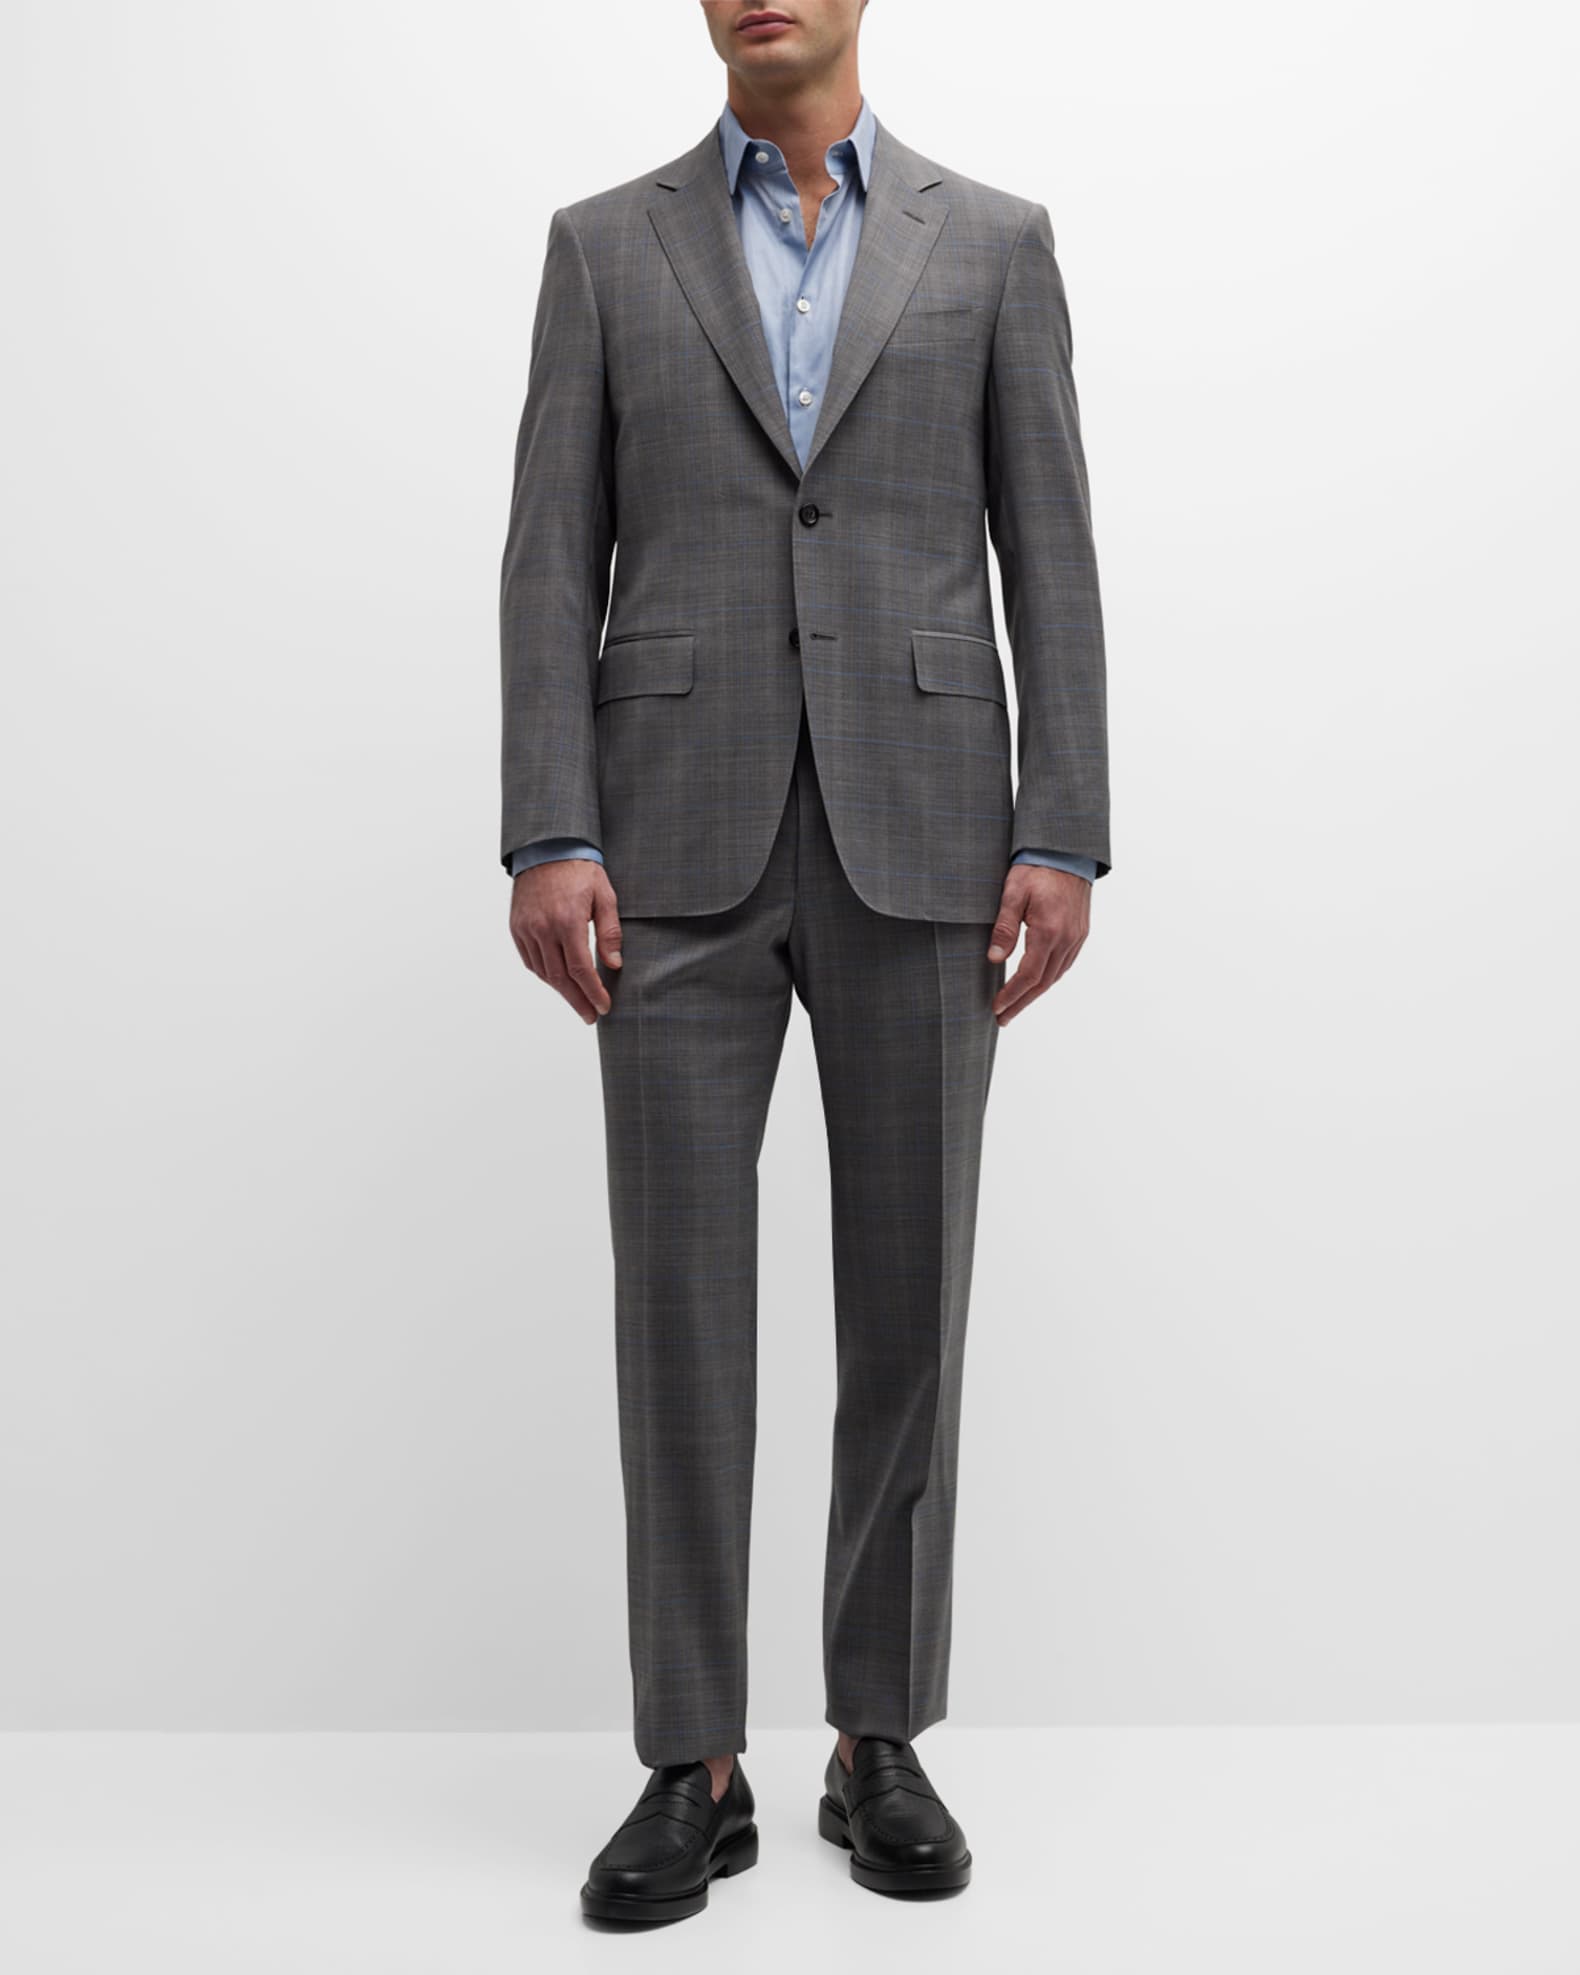 Canali Men's Plaid with Windowpane Wool Suit | Neiman Marcus